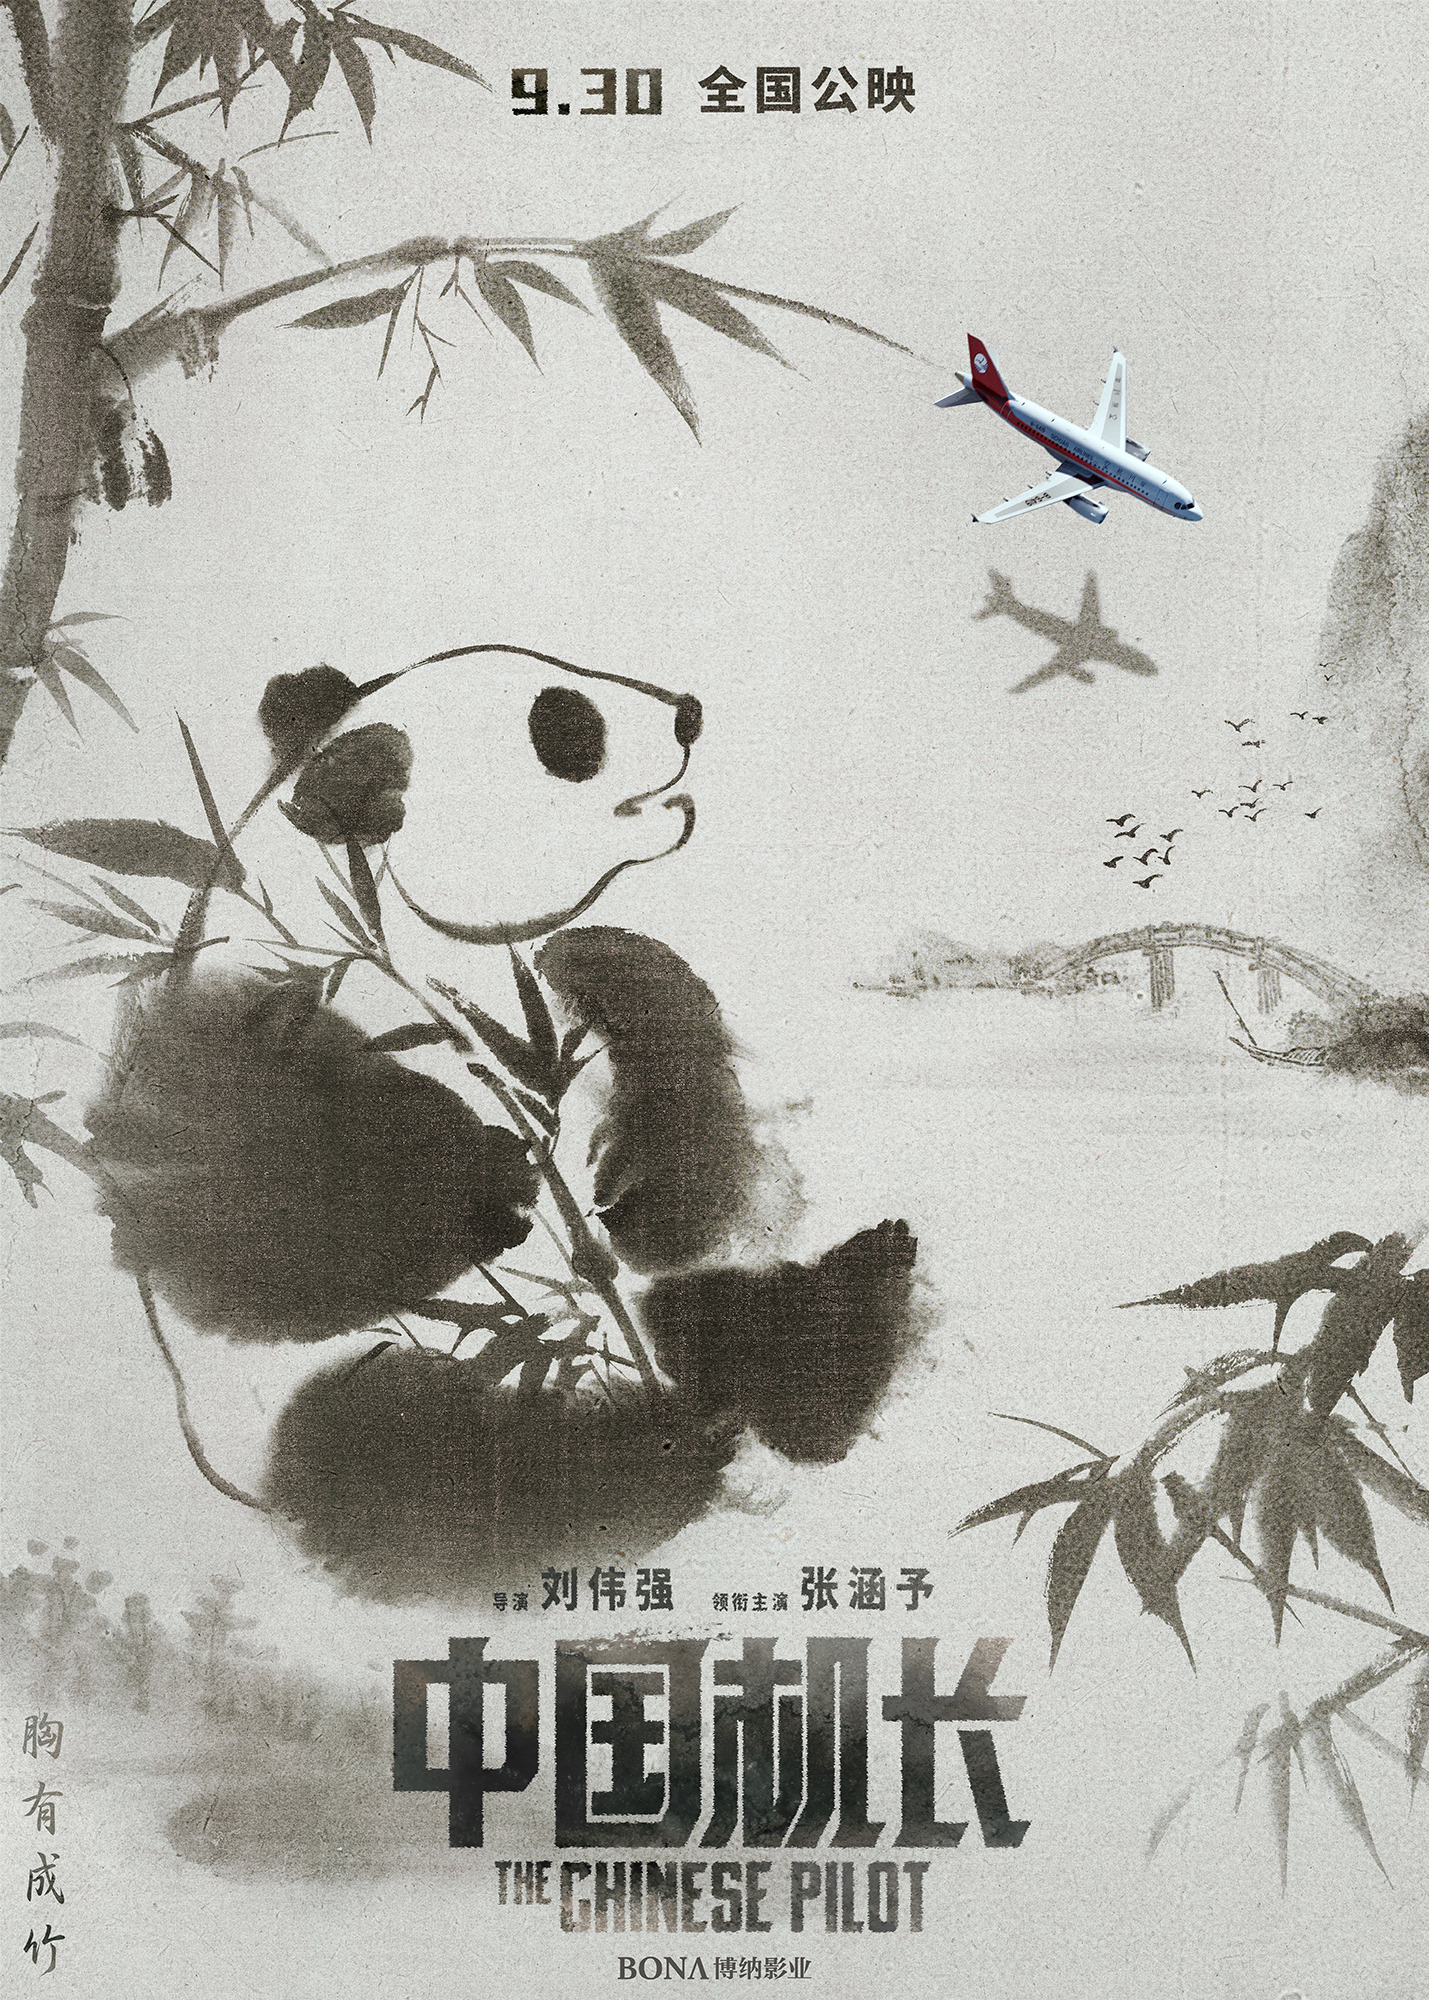 Mega Sized Movie Poster Image for The Chinese Pilot (#13 of 17)